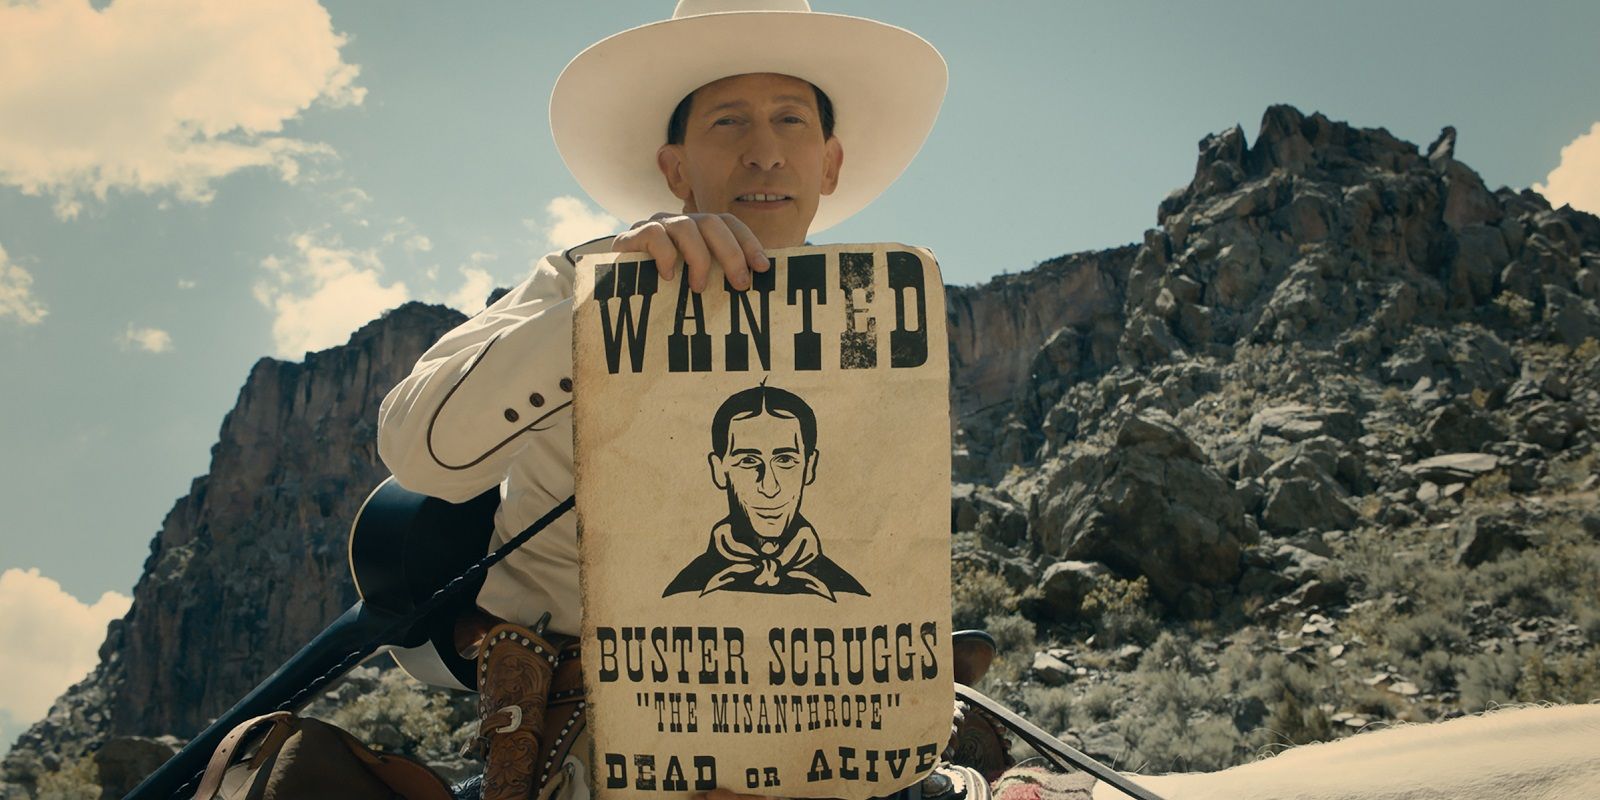 Buster Scruggs holding a wanted poster of himself